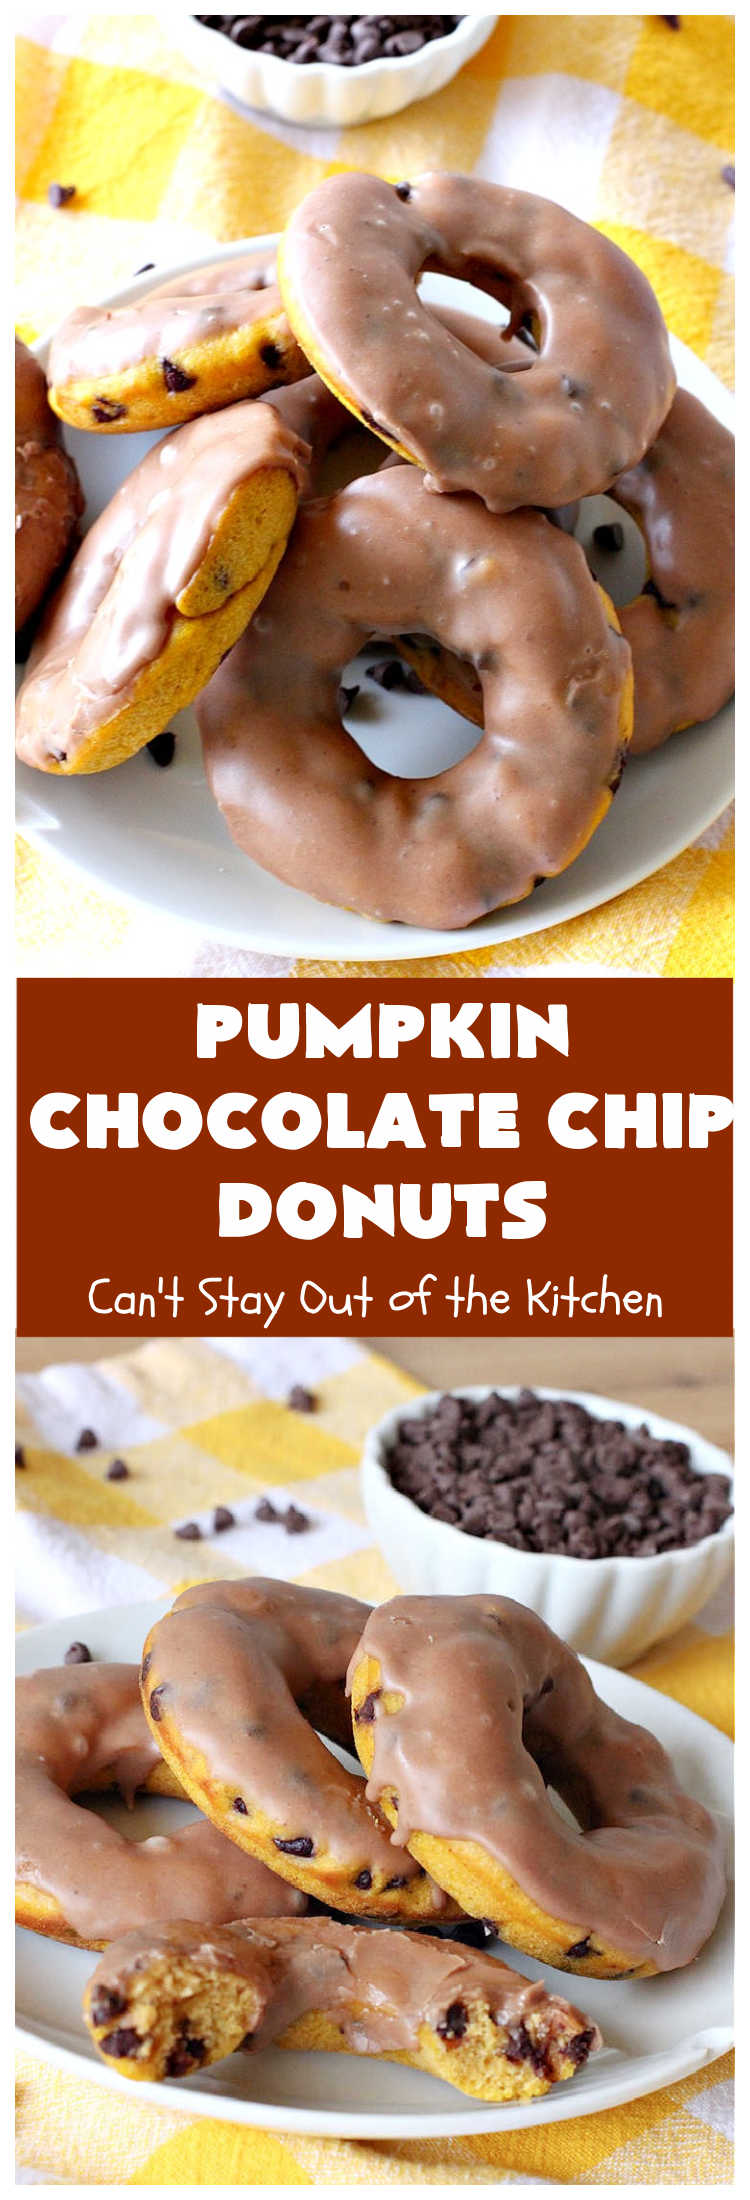 Pumpkin Chocolate Chip Donuts | Can't Stay Out of the Kitchen | these phenomenal #donuts are so mouthwatering. They have double the #chocolate & double the #pumpkin flavor. You'll be drooling over every mouthful. Highly recommended for #Thanksgiving or #Christmas #Breakfast. #Holiday #HolidayBreakfast #PumpkinDonuts #ChocolateChipDonuts #fall #FallBaking #PumpkinChocolateChipDonuts #ChocolateChips